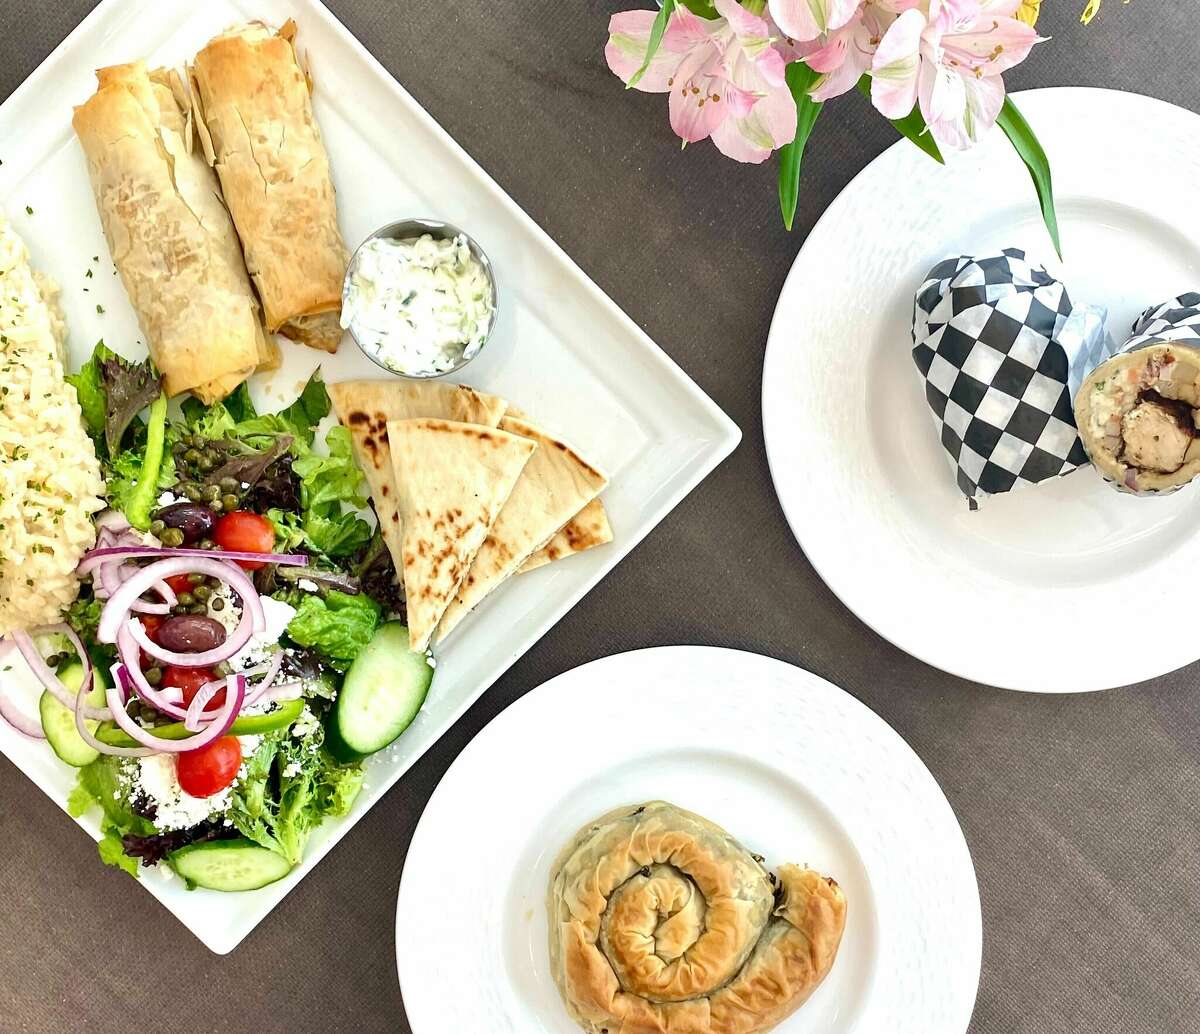 Traditional Greek eats star at Anonymous Cafe.